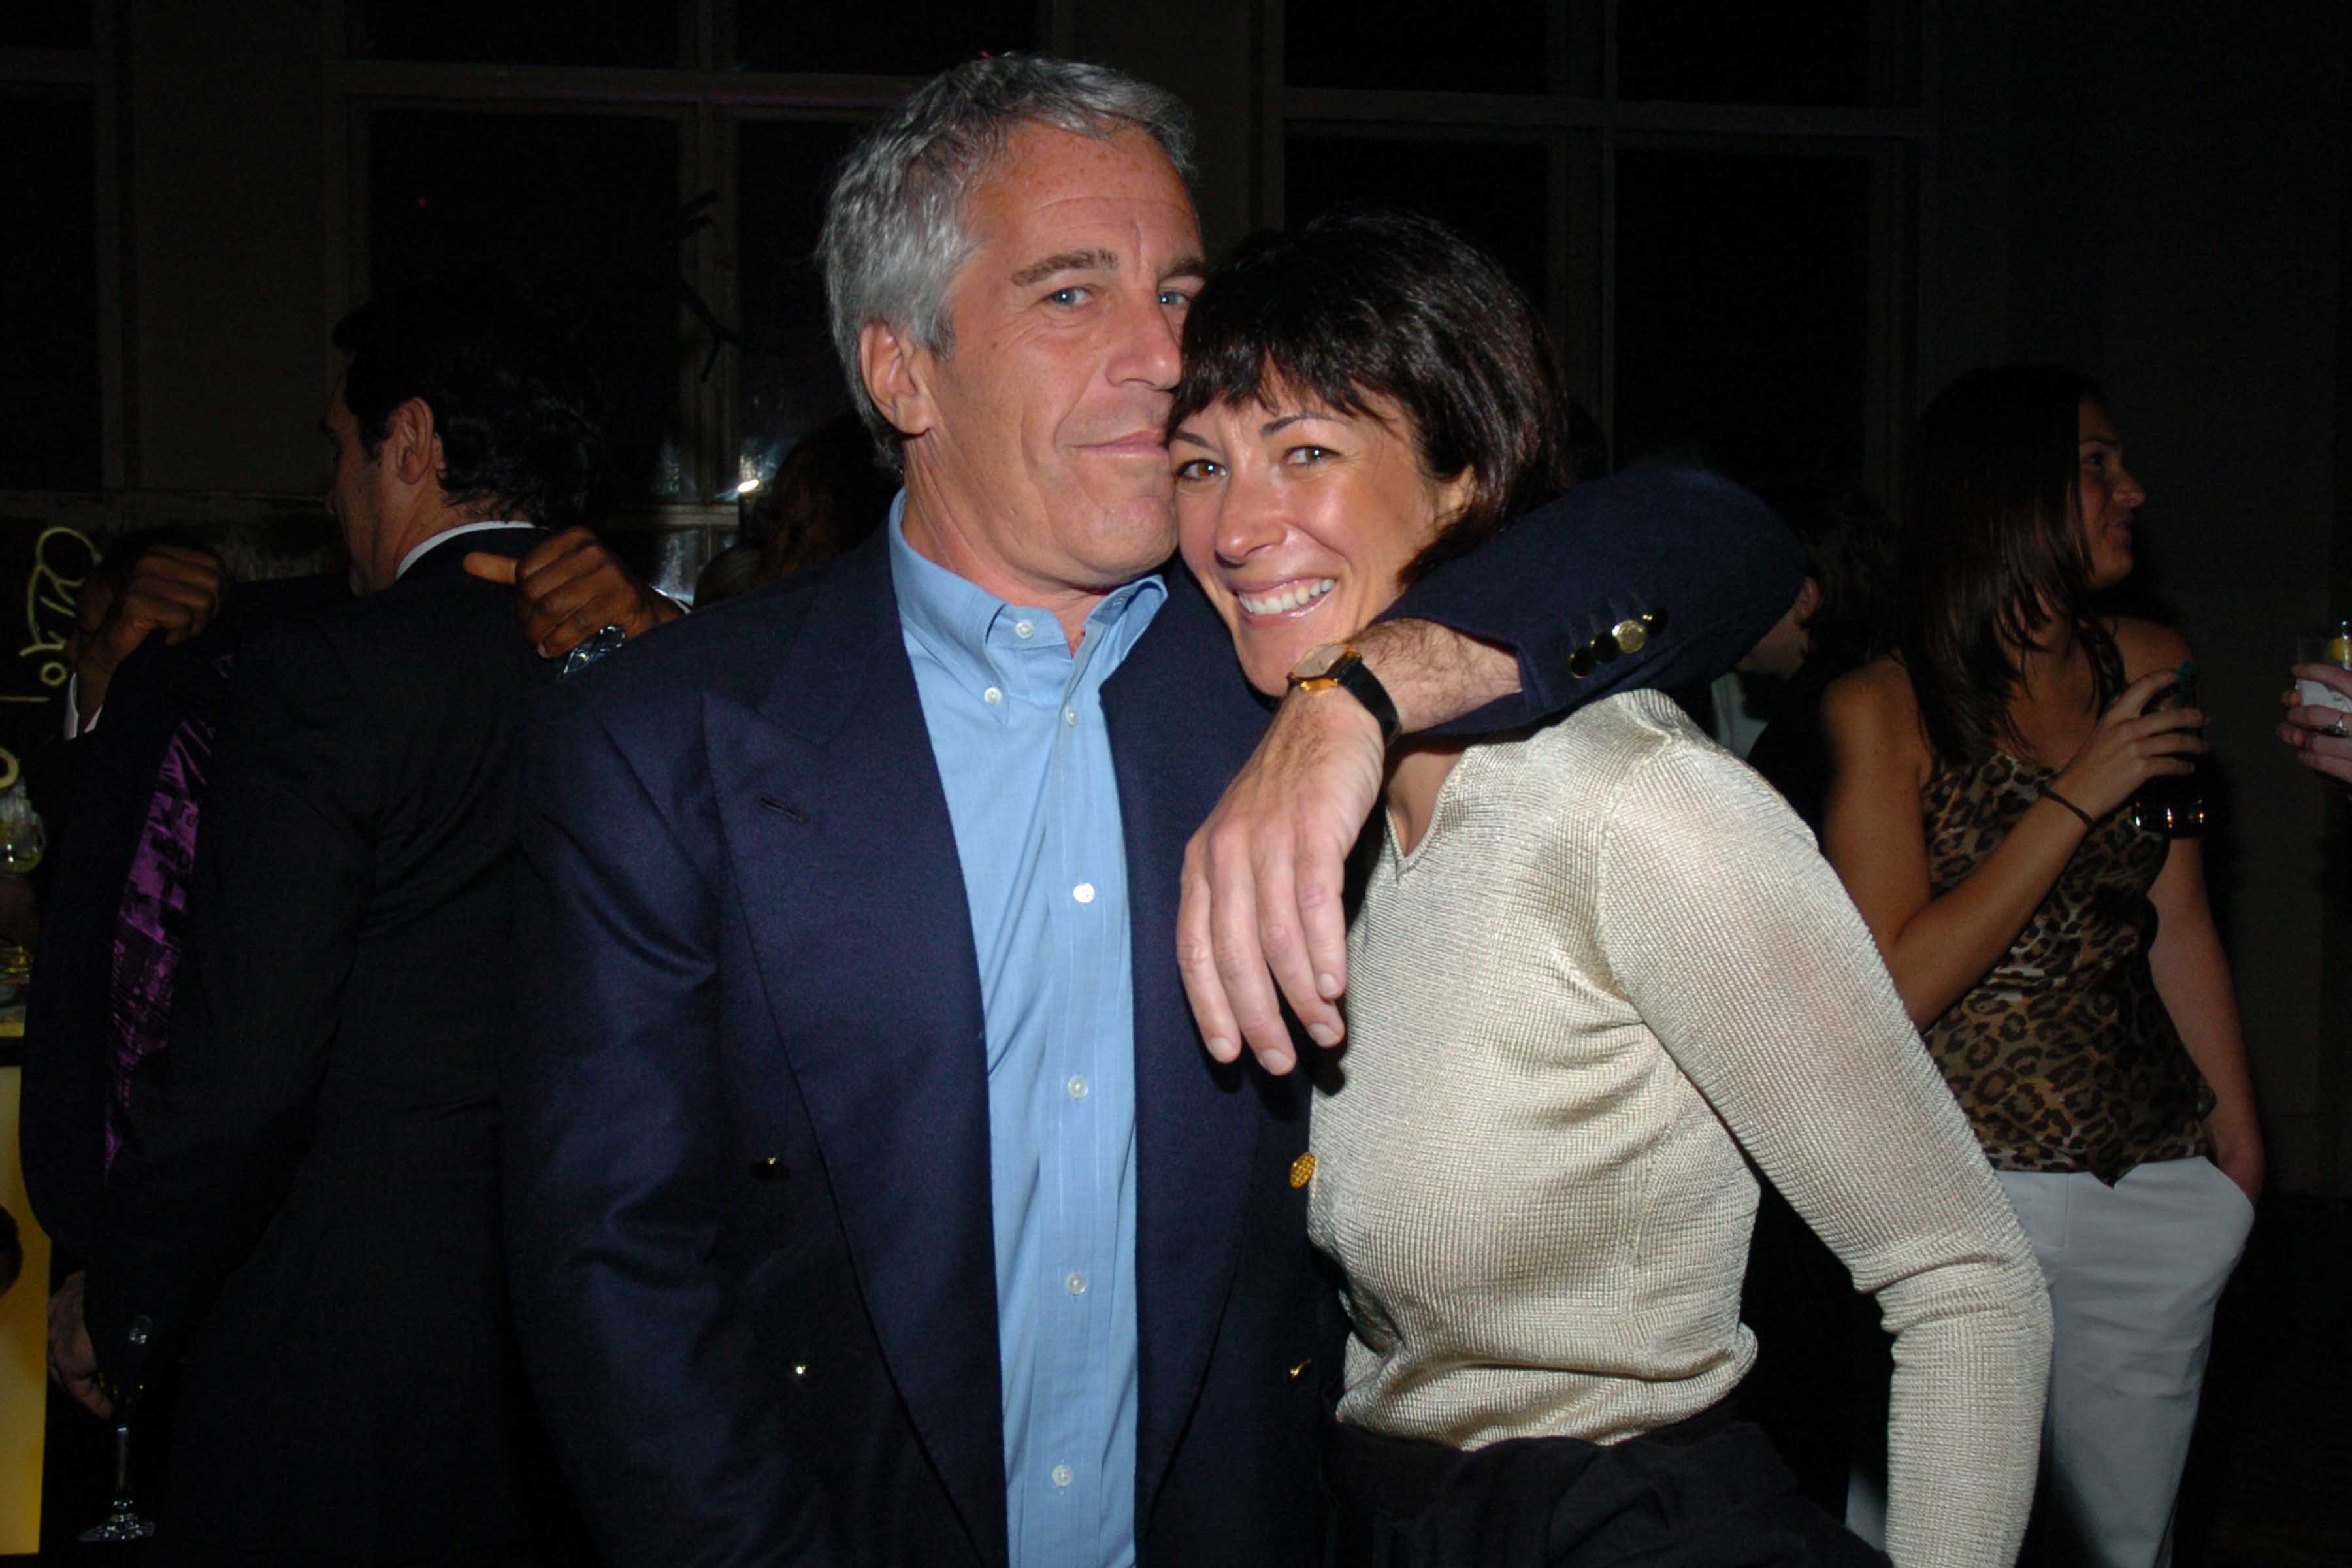 Jeffrey Epstein’s Former Companion Ghislaine Maxwell Arrested; Is Prince Andrew Next?